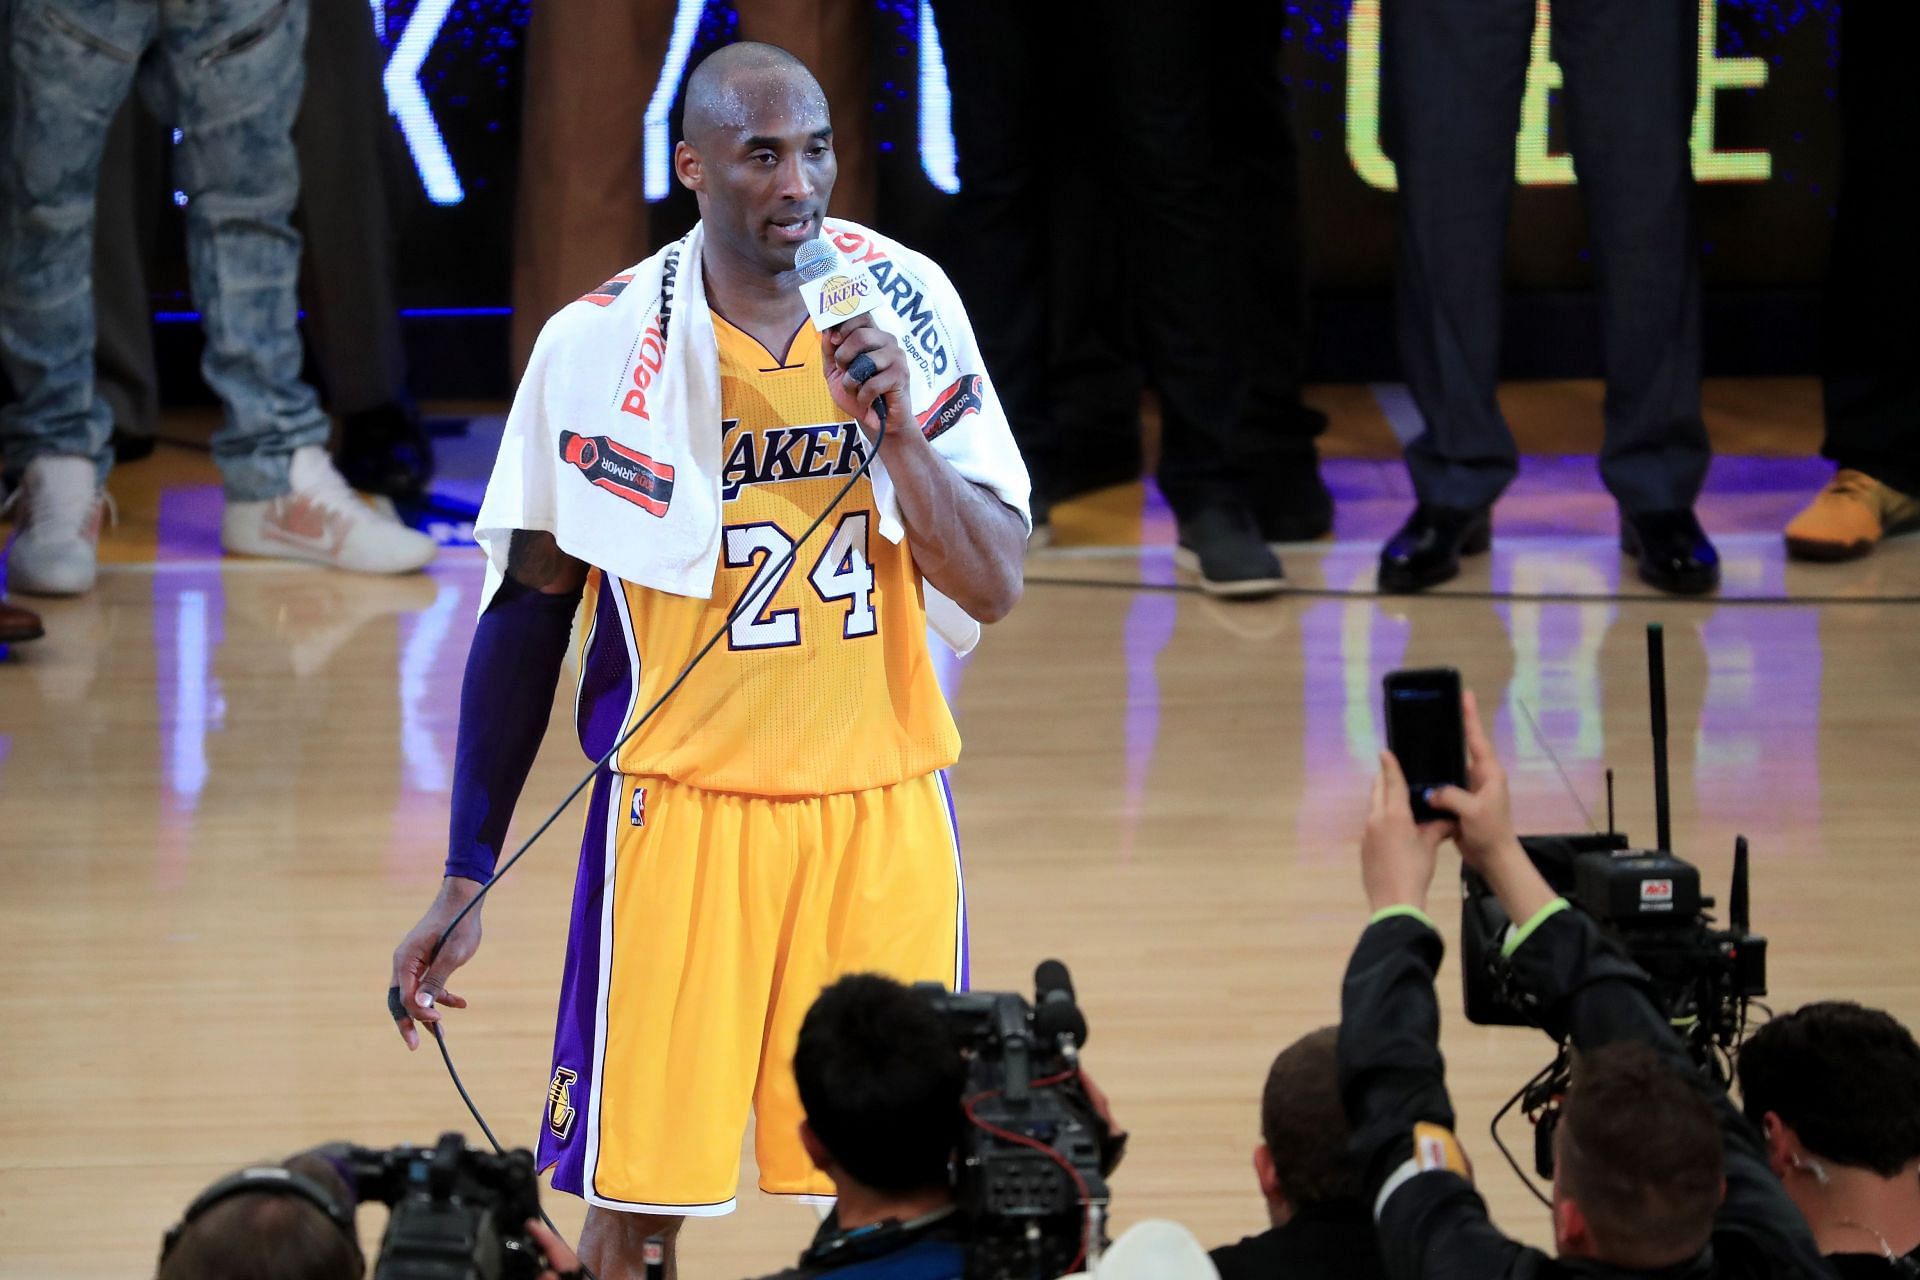 Kobe addresses the crowd after scoring 60 points in his final NBA game against the Utah Jazz